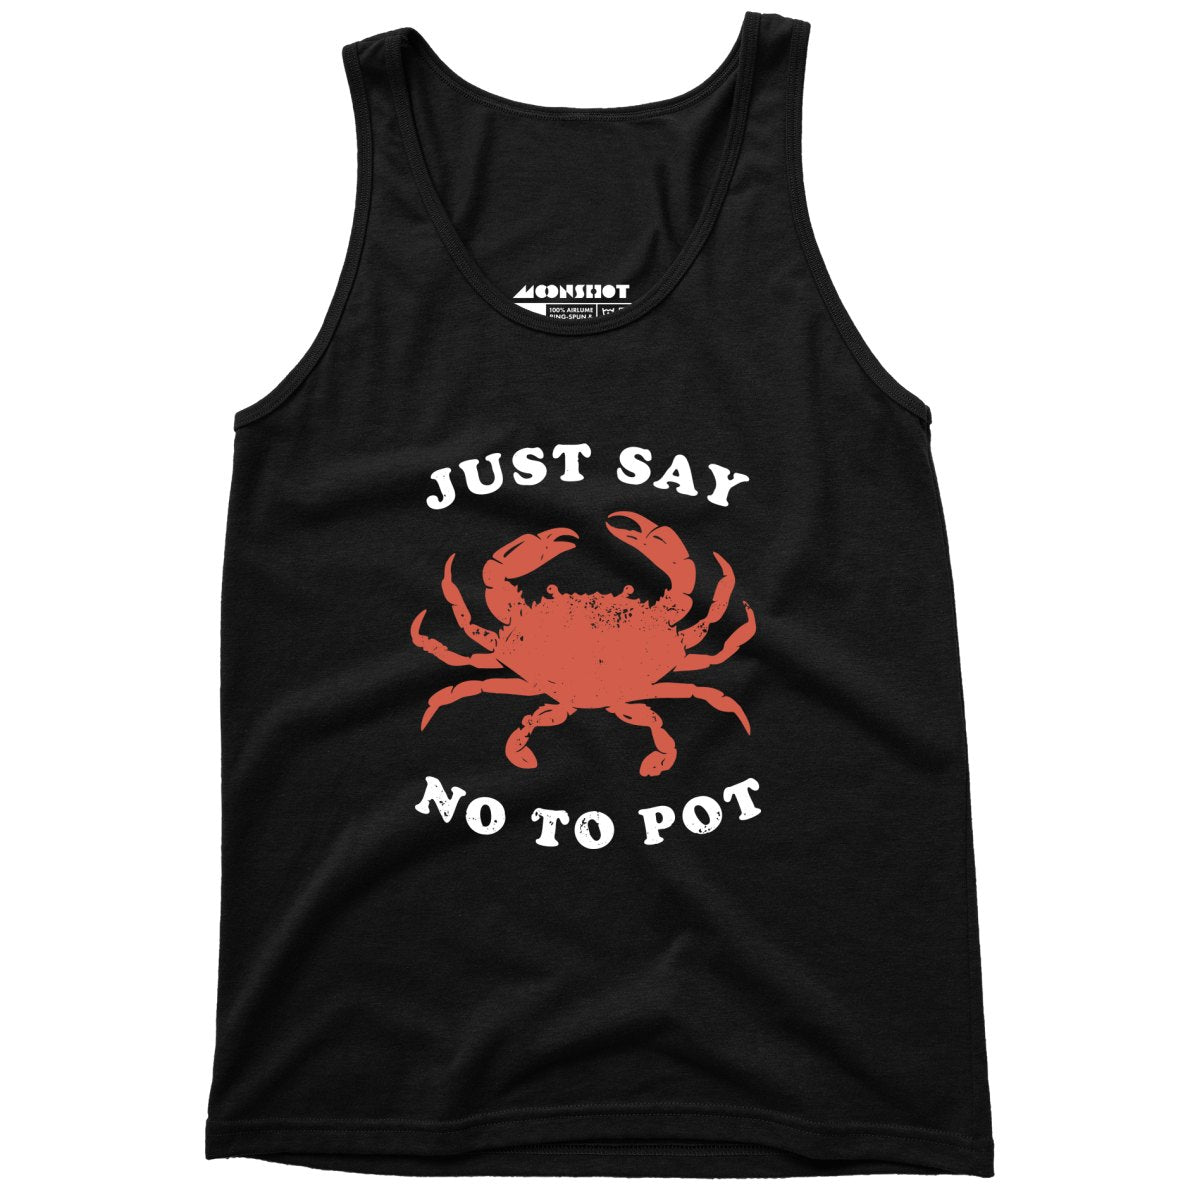 Just Say No To Pot - Unisex Tank Top